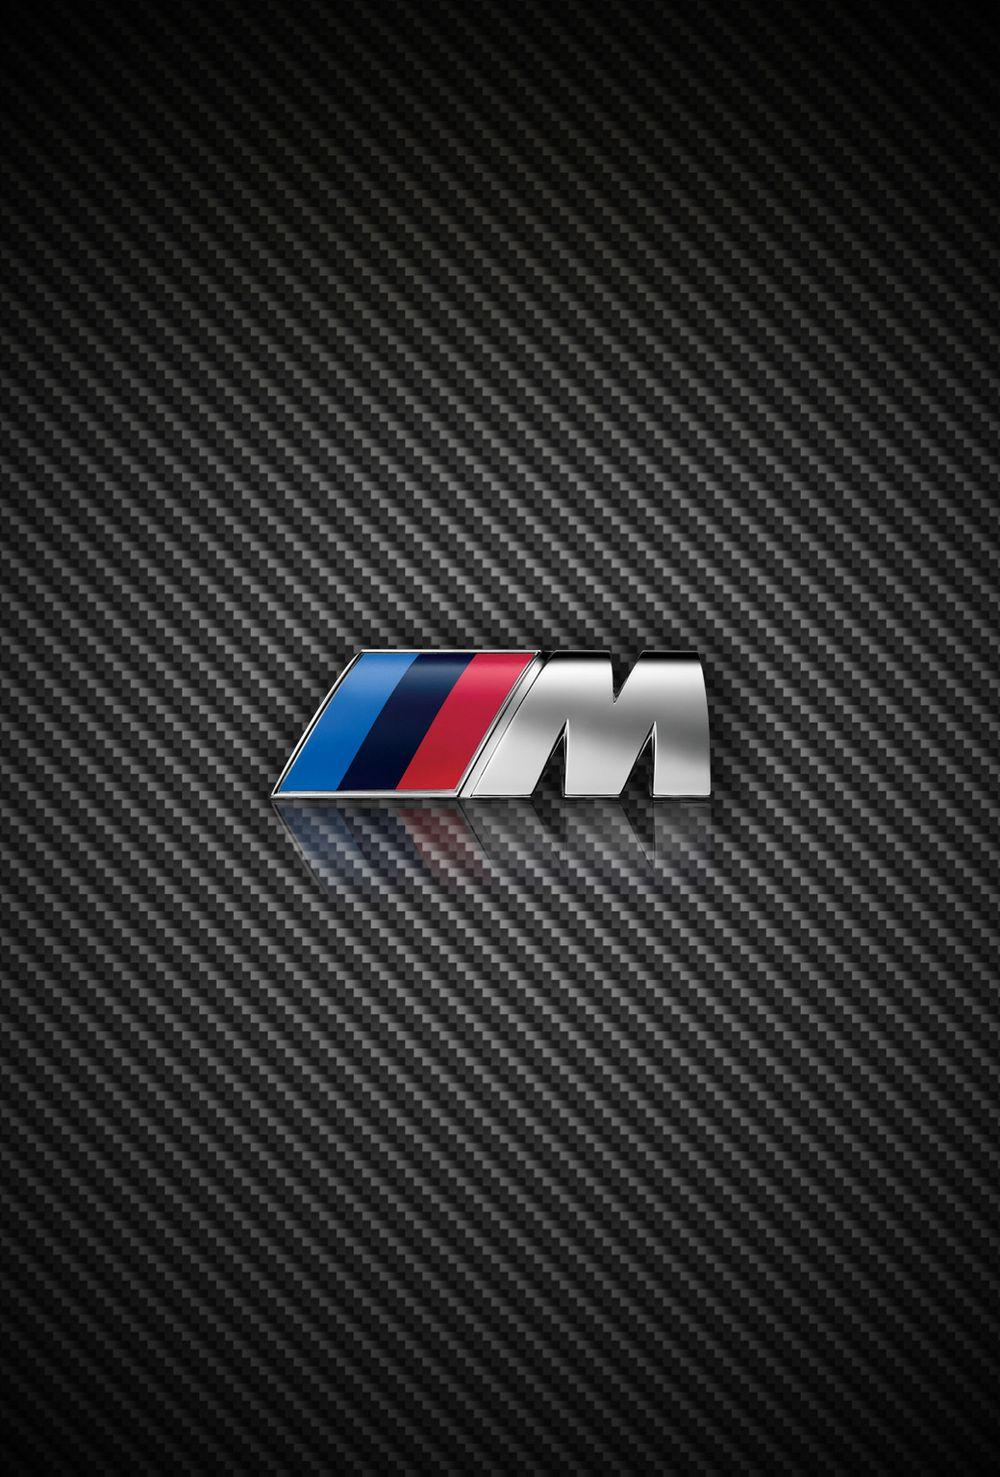 Carbon Fiber BMW and M Power iPhone wallpaper for iOS 7 parallax